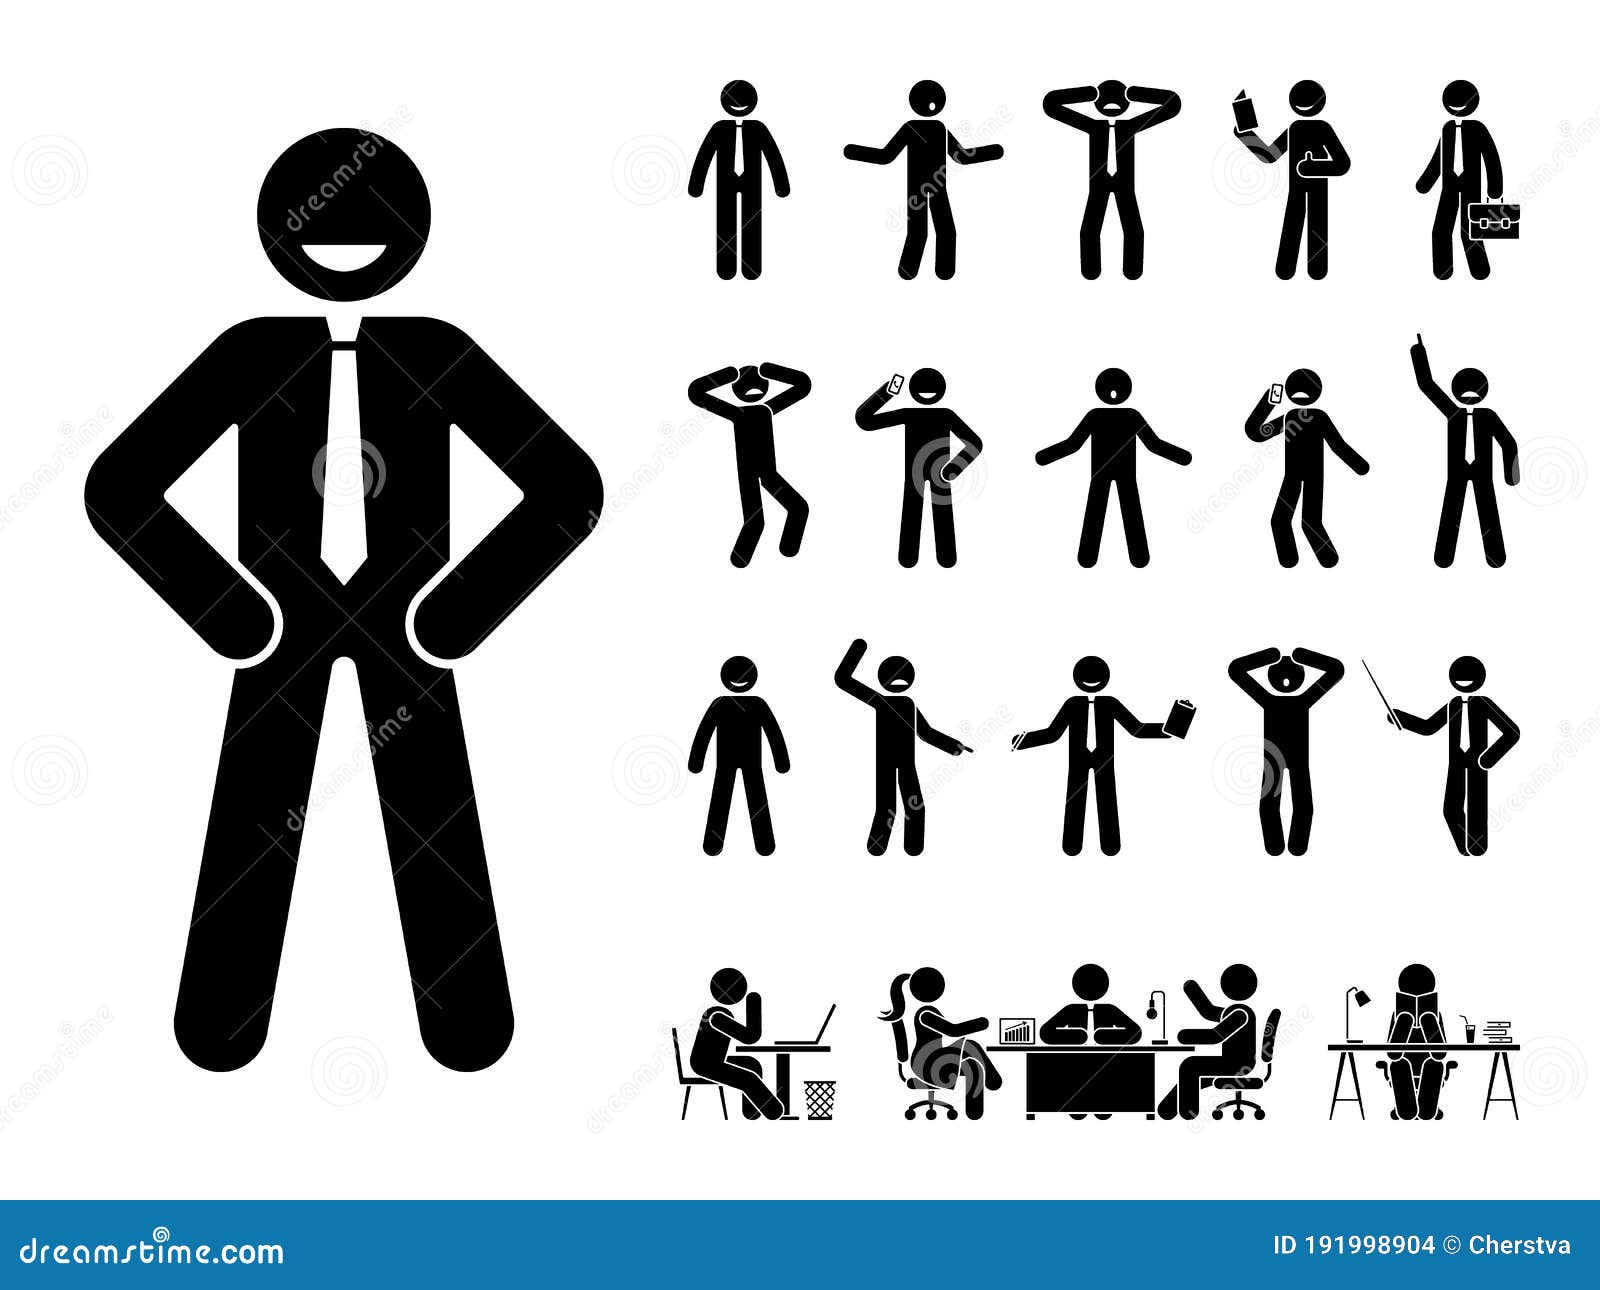 Stickman Stick Figure Pointing Showing Presenting Stock Vector